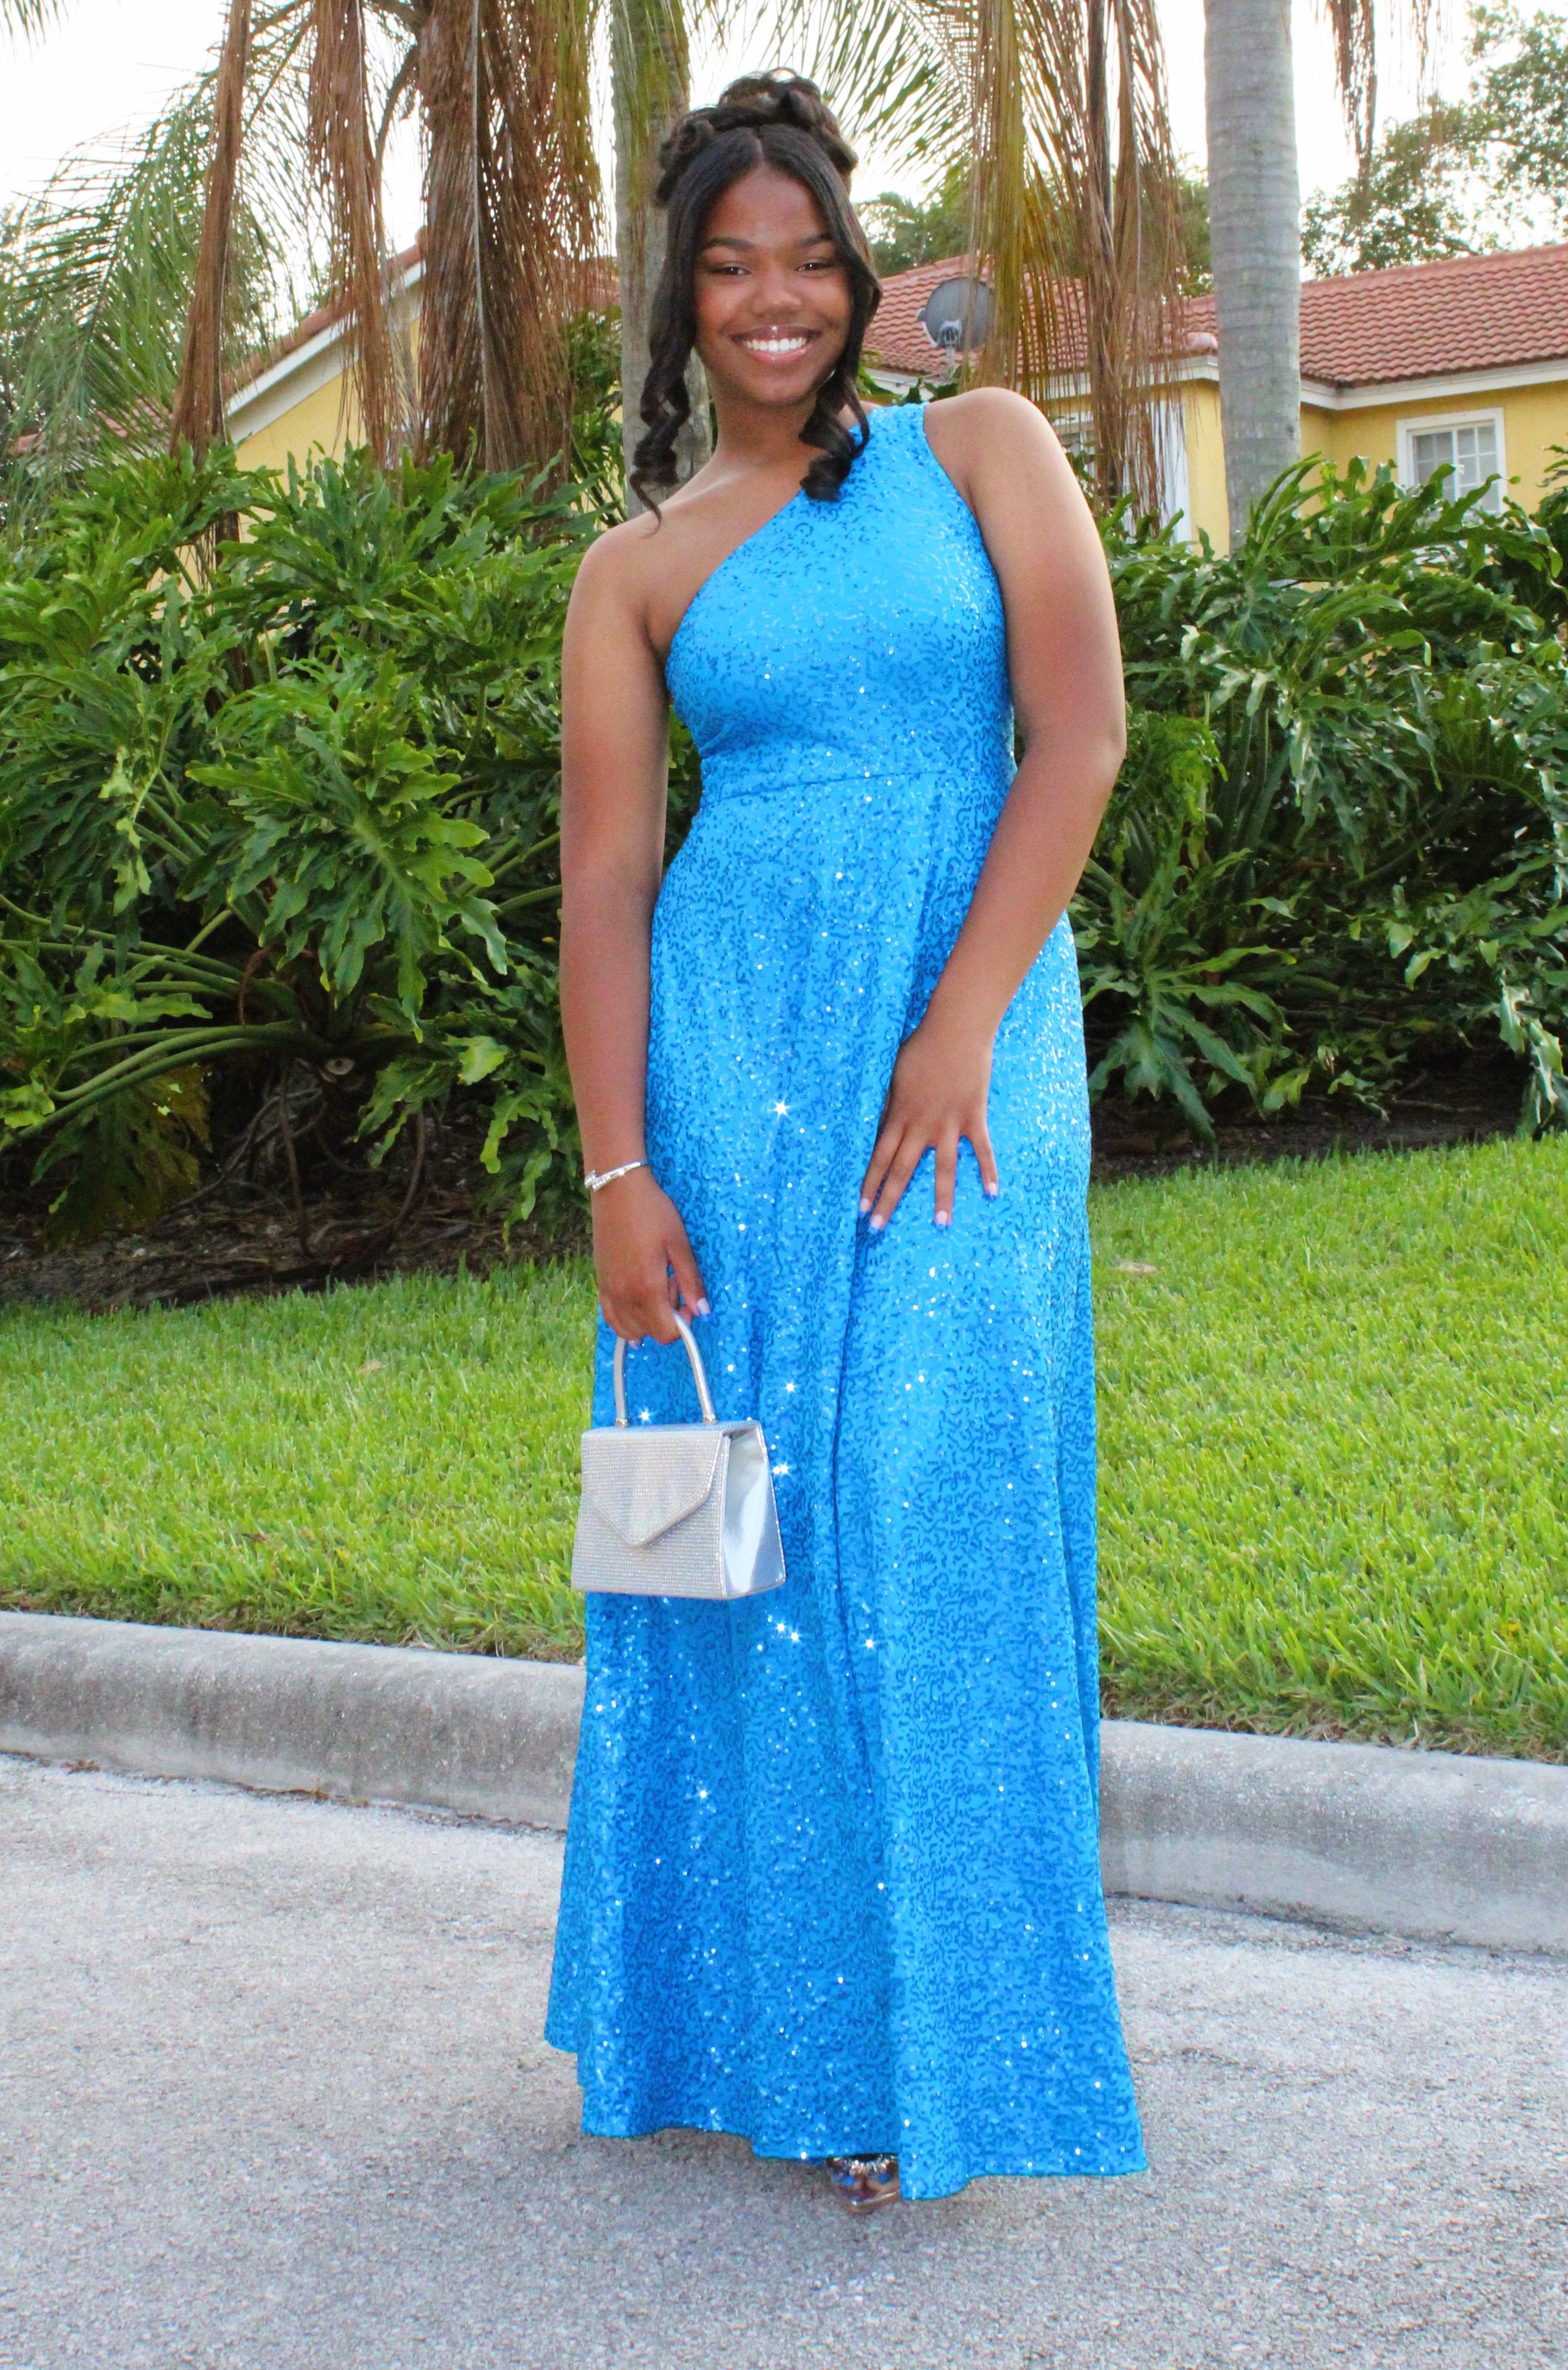 Made By A Fabricista: A Mother's Day Gift - Making my Daughter's Prom Dress